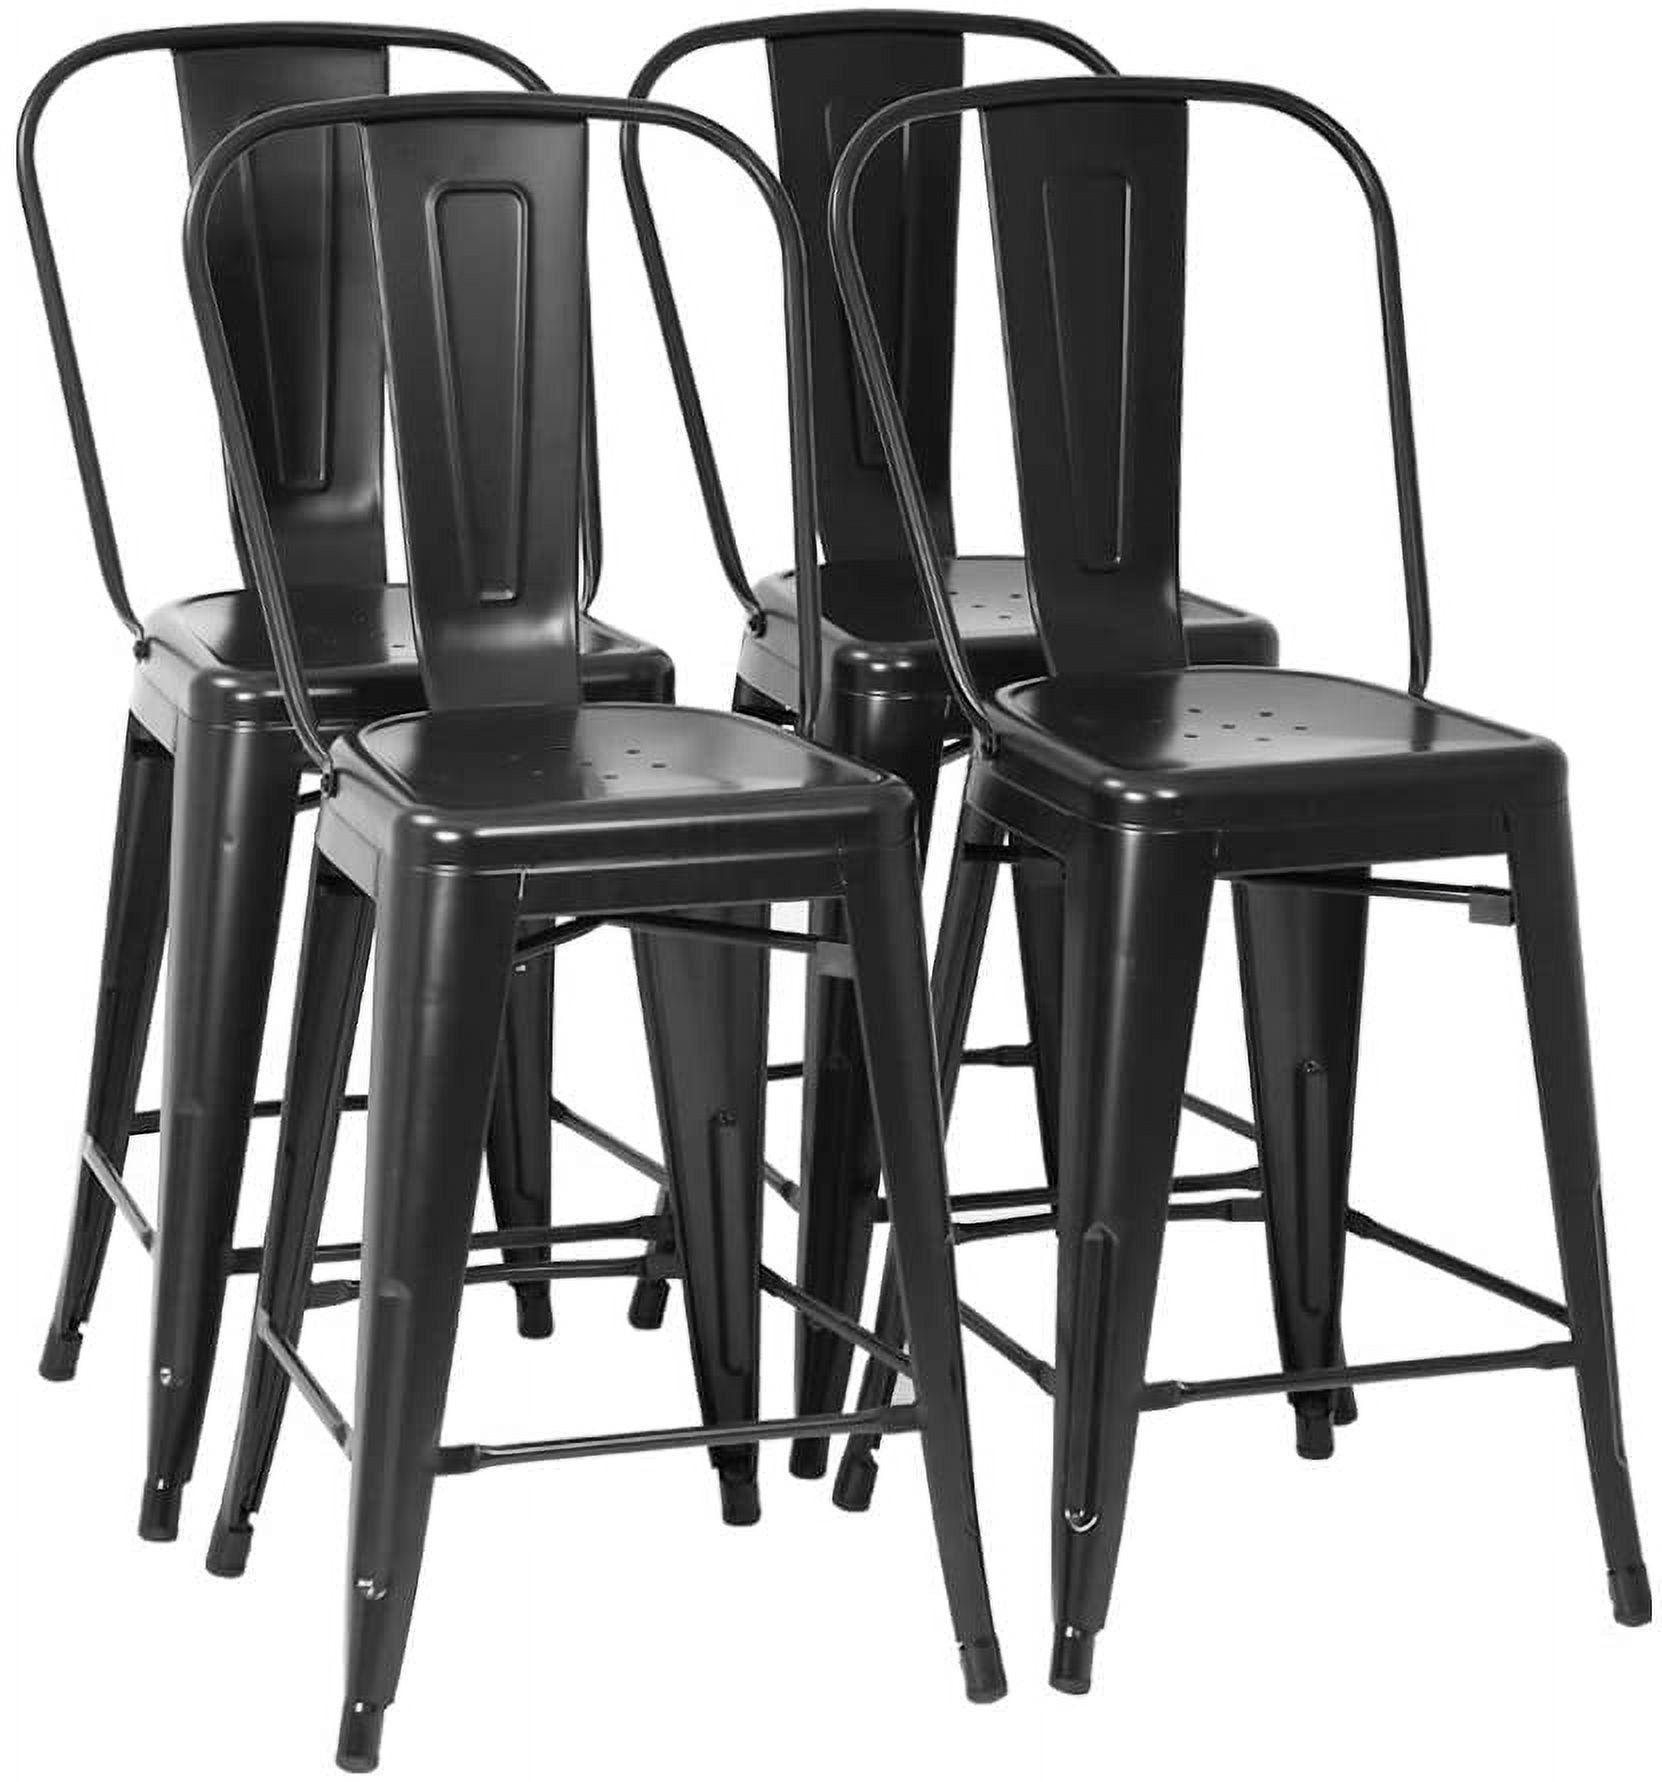 Bar Stool Set Of 4 Counter Height Barstool With Back 24 Inches Seat Height Industrial Bar Chairs Indoor Outdoor Metal Bar Stool Kitchen Stools Restaurant Patio Stool Stackable Modern Kitchen Stool - image 1 of 7